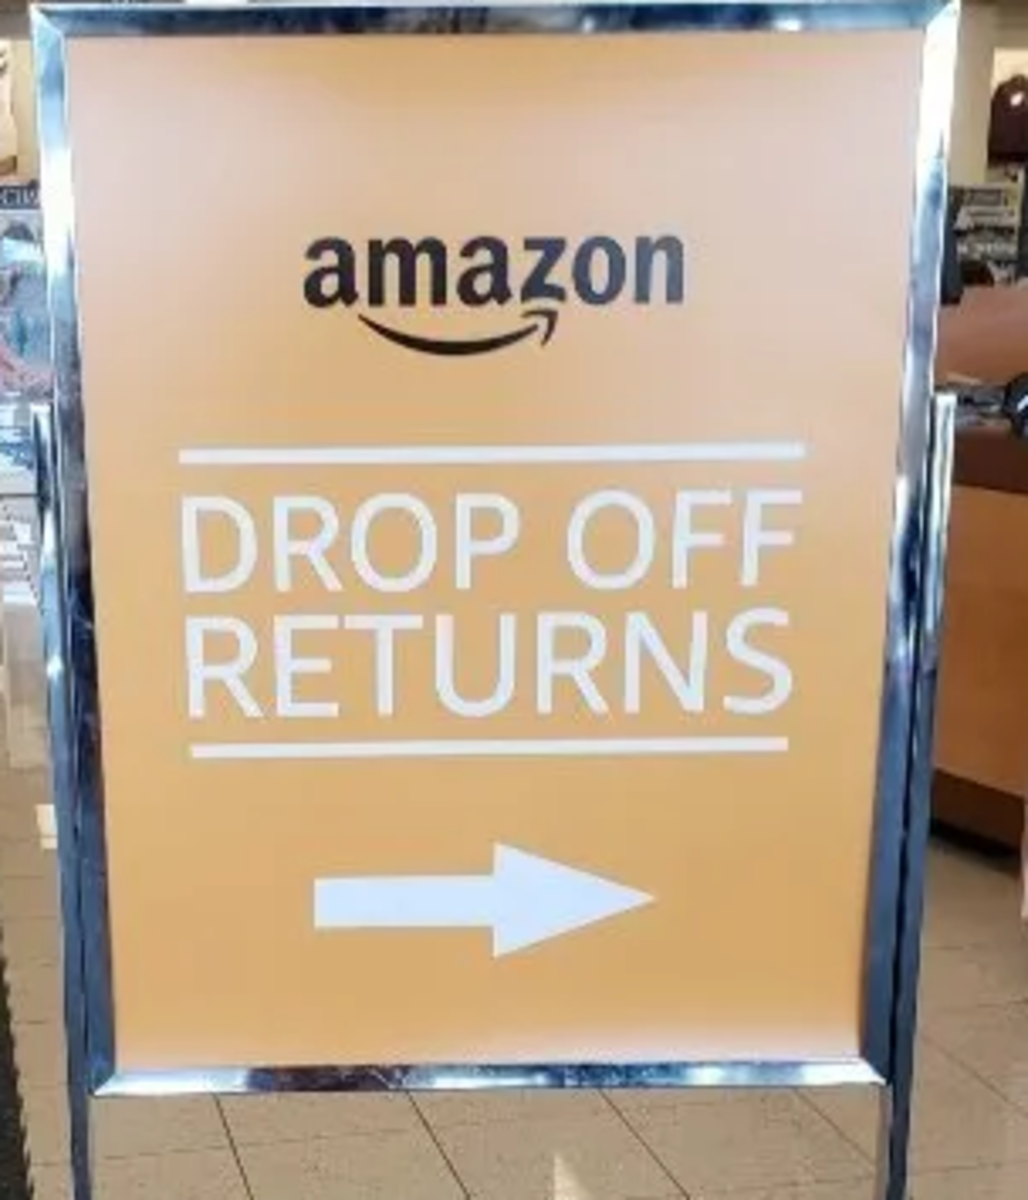 Amazon makes returns easy for many customers with Kohls and UPS Stores as drop off locations